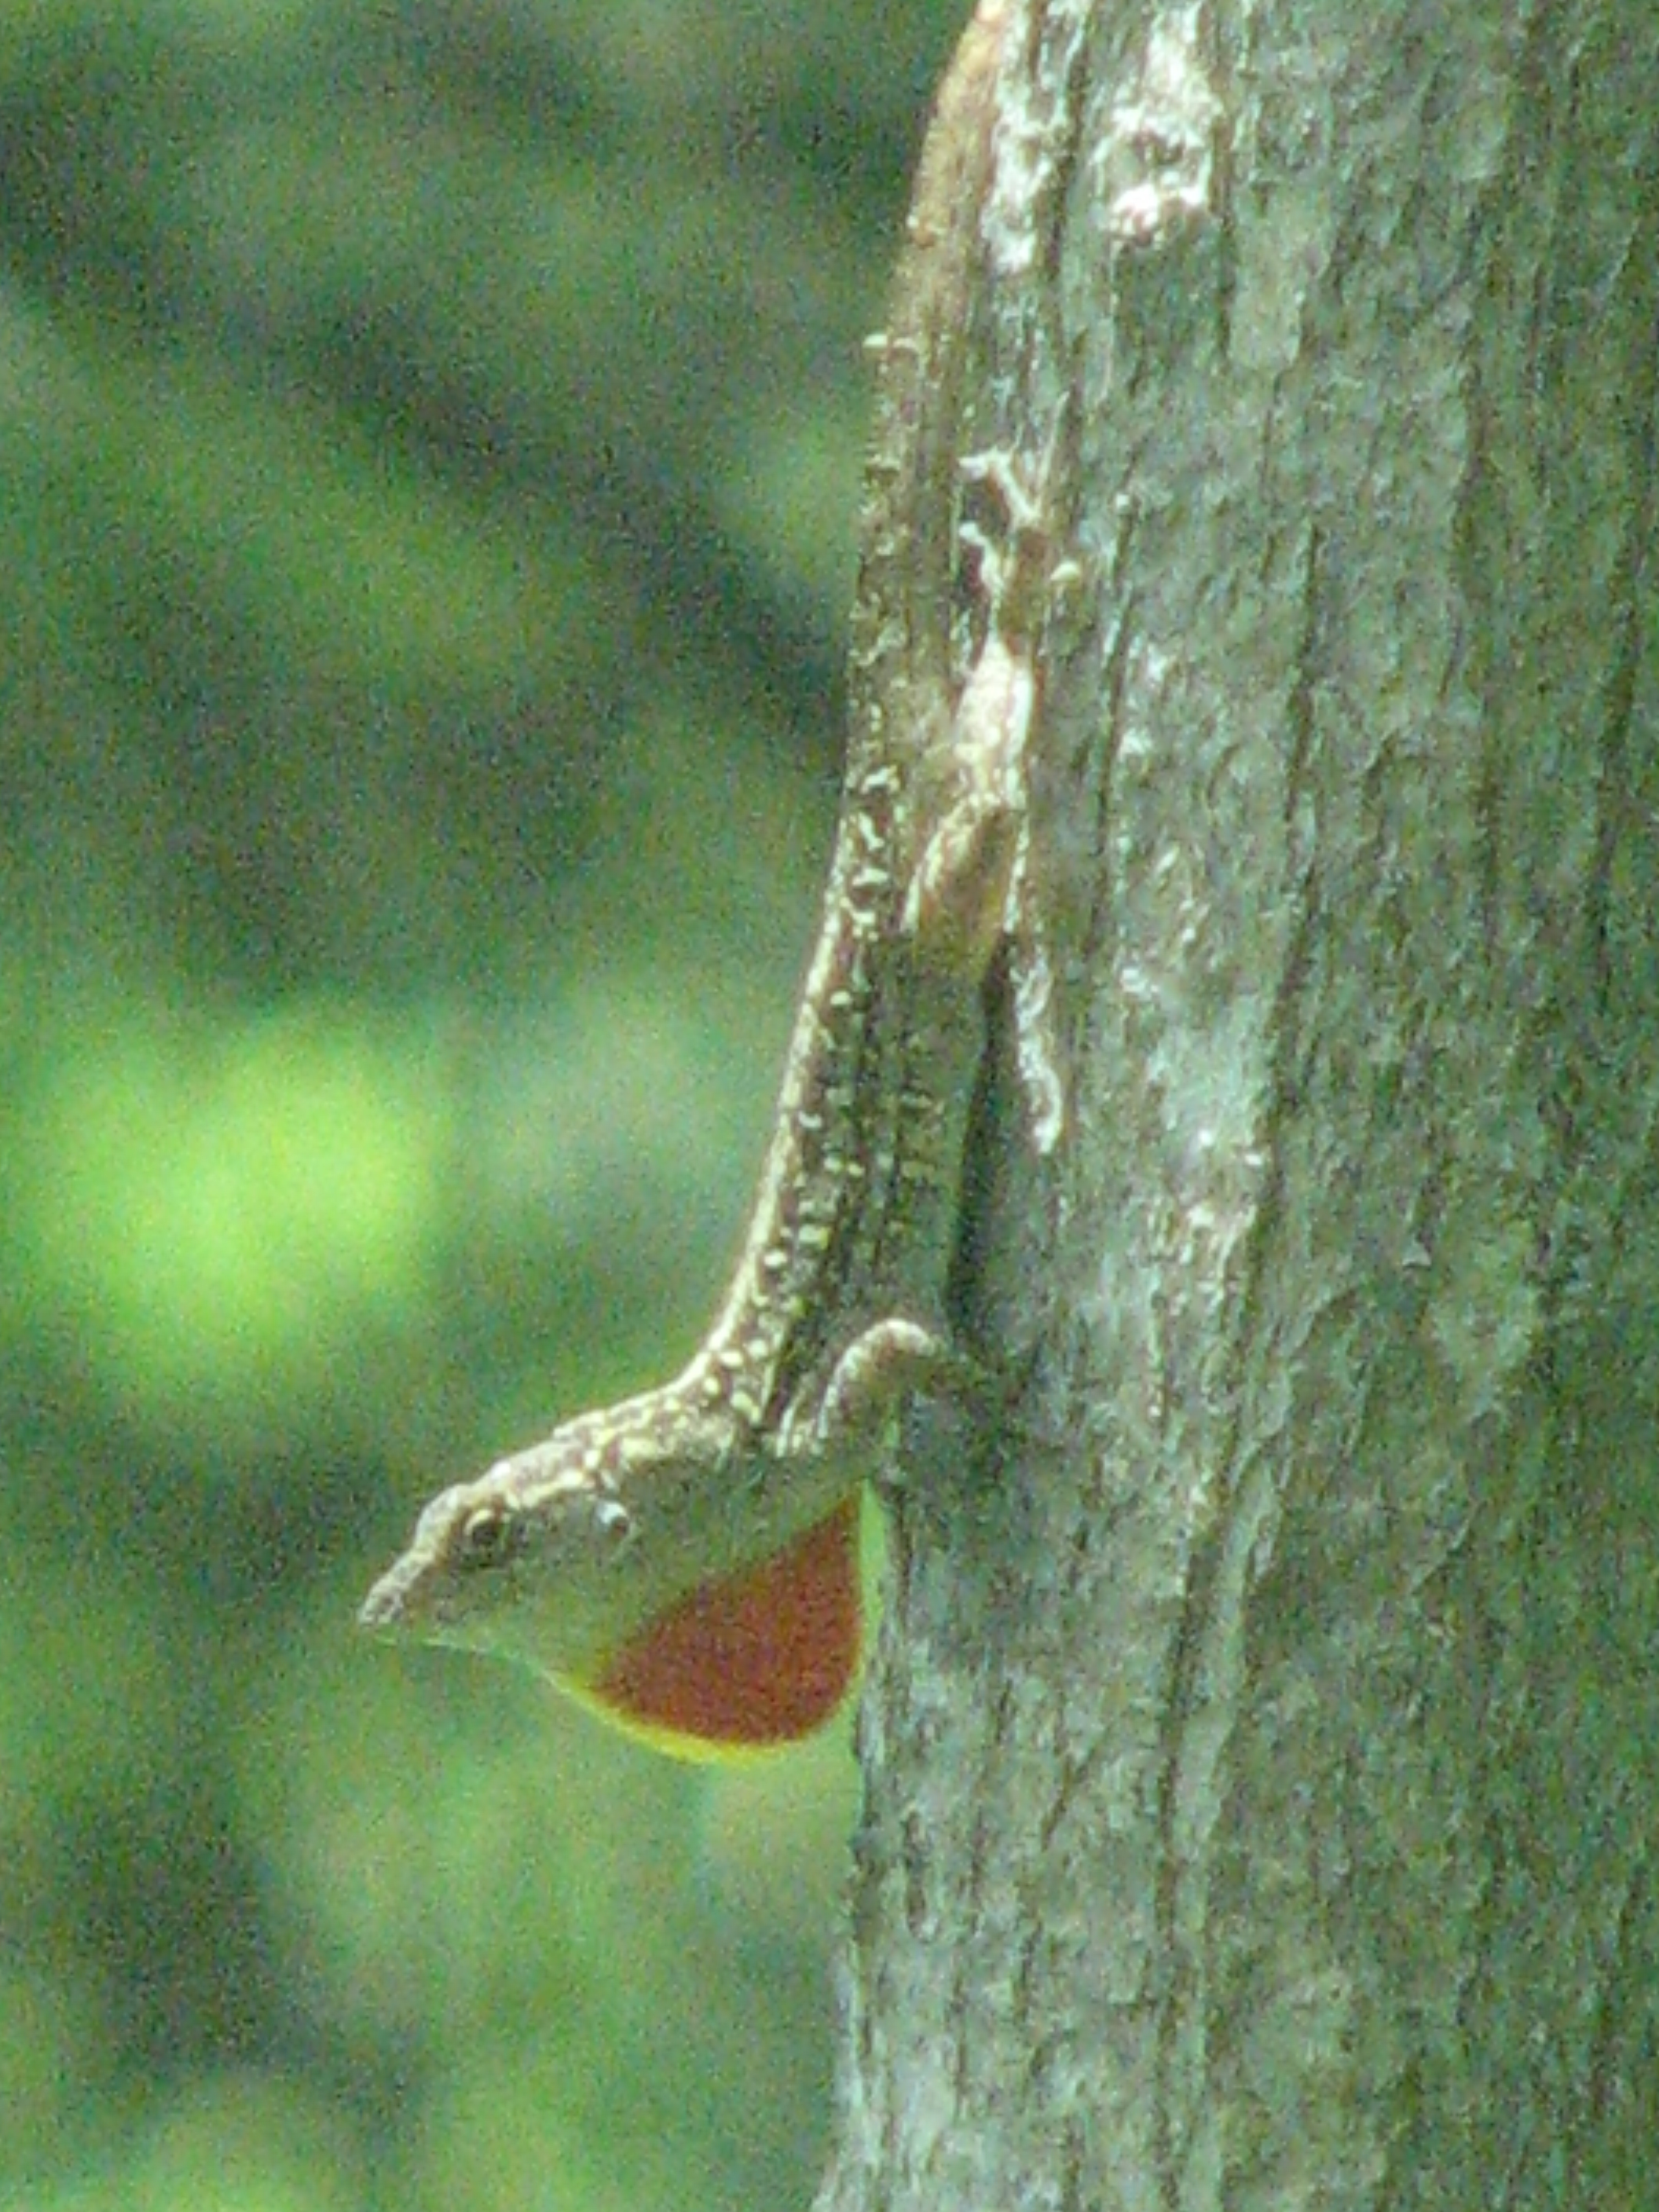 Brown Anoles